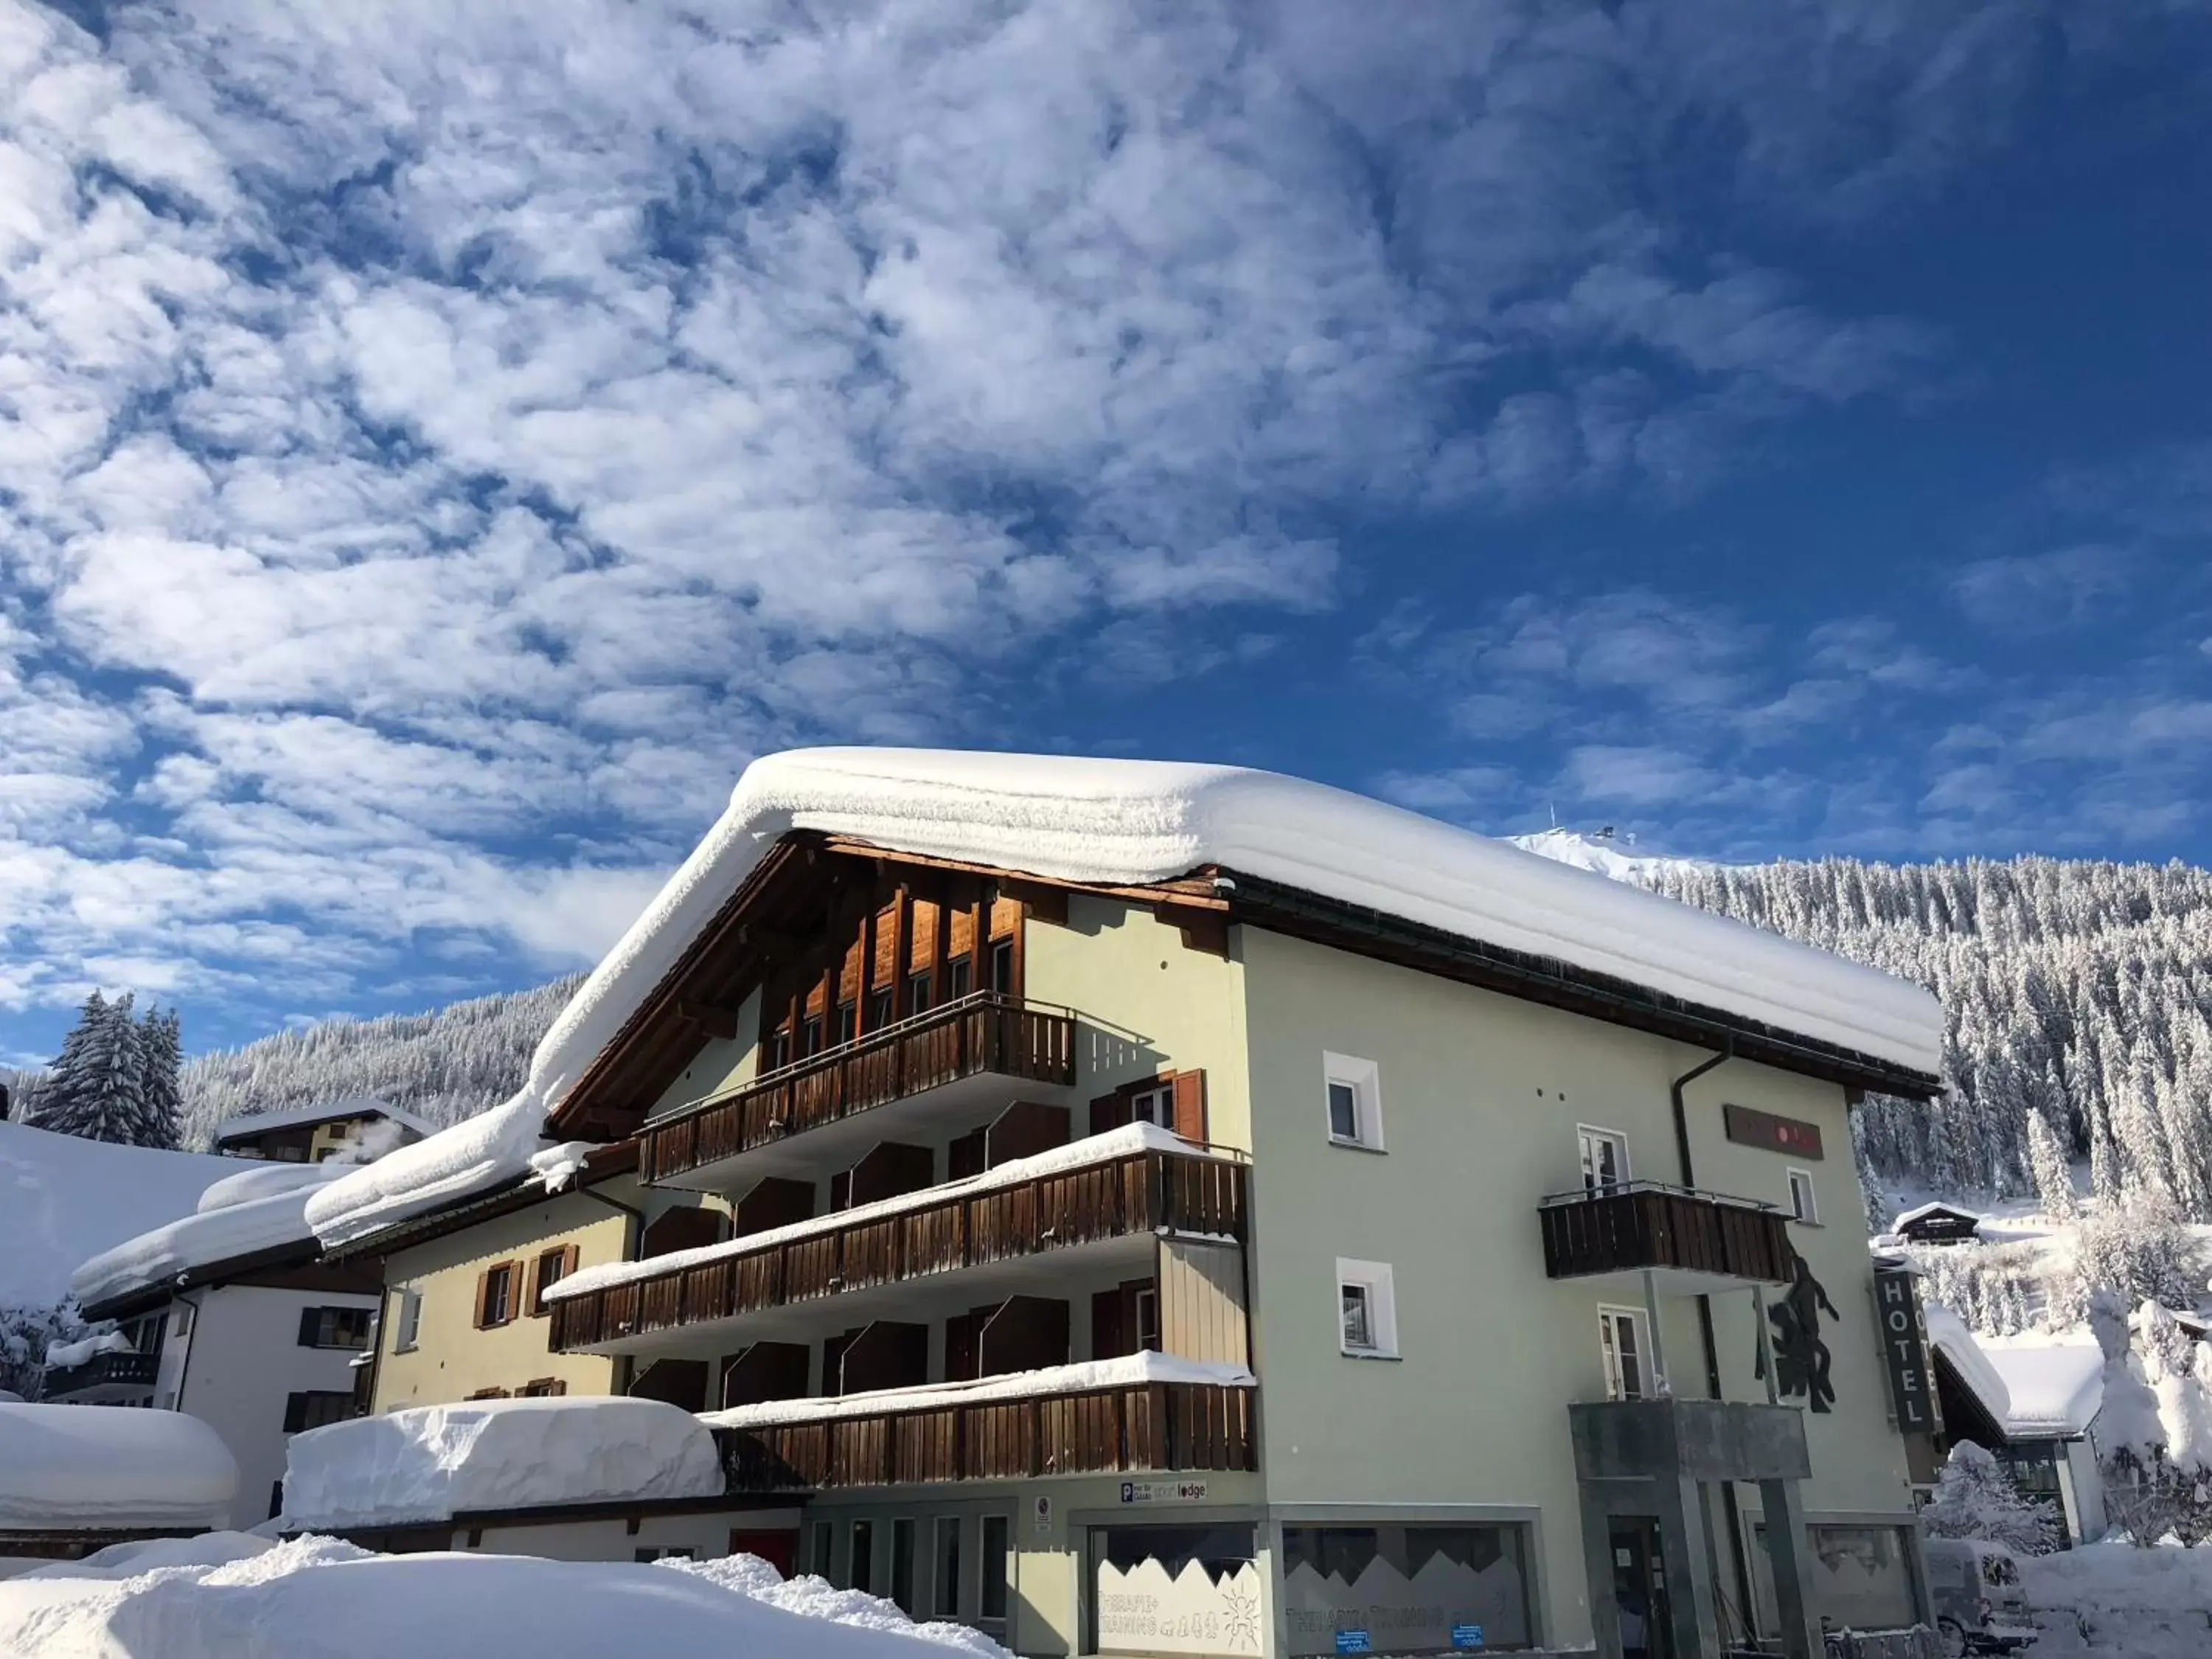 Property building, Winter in Sport-Lodge Klosters